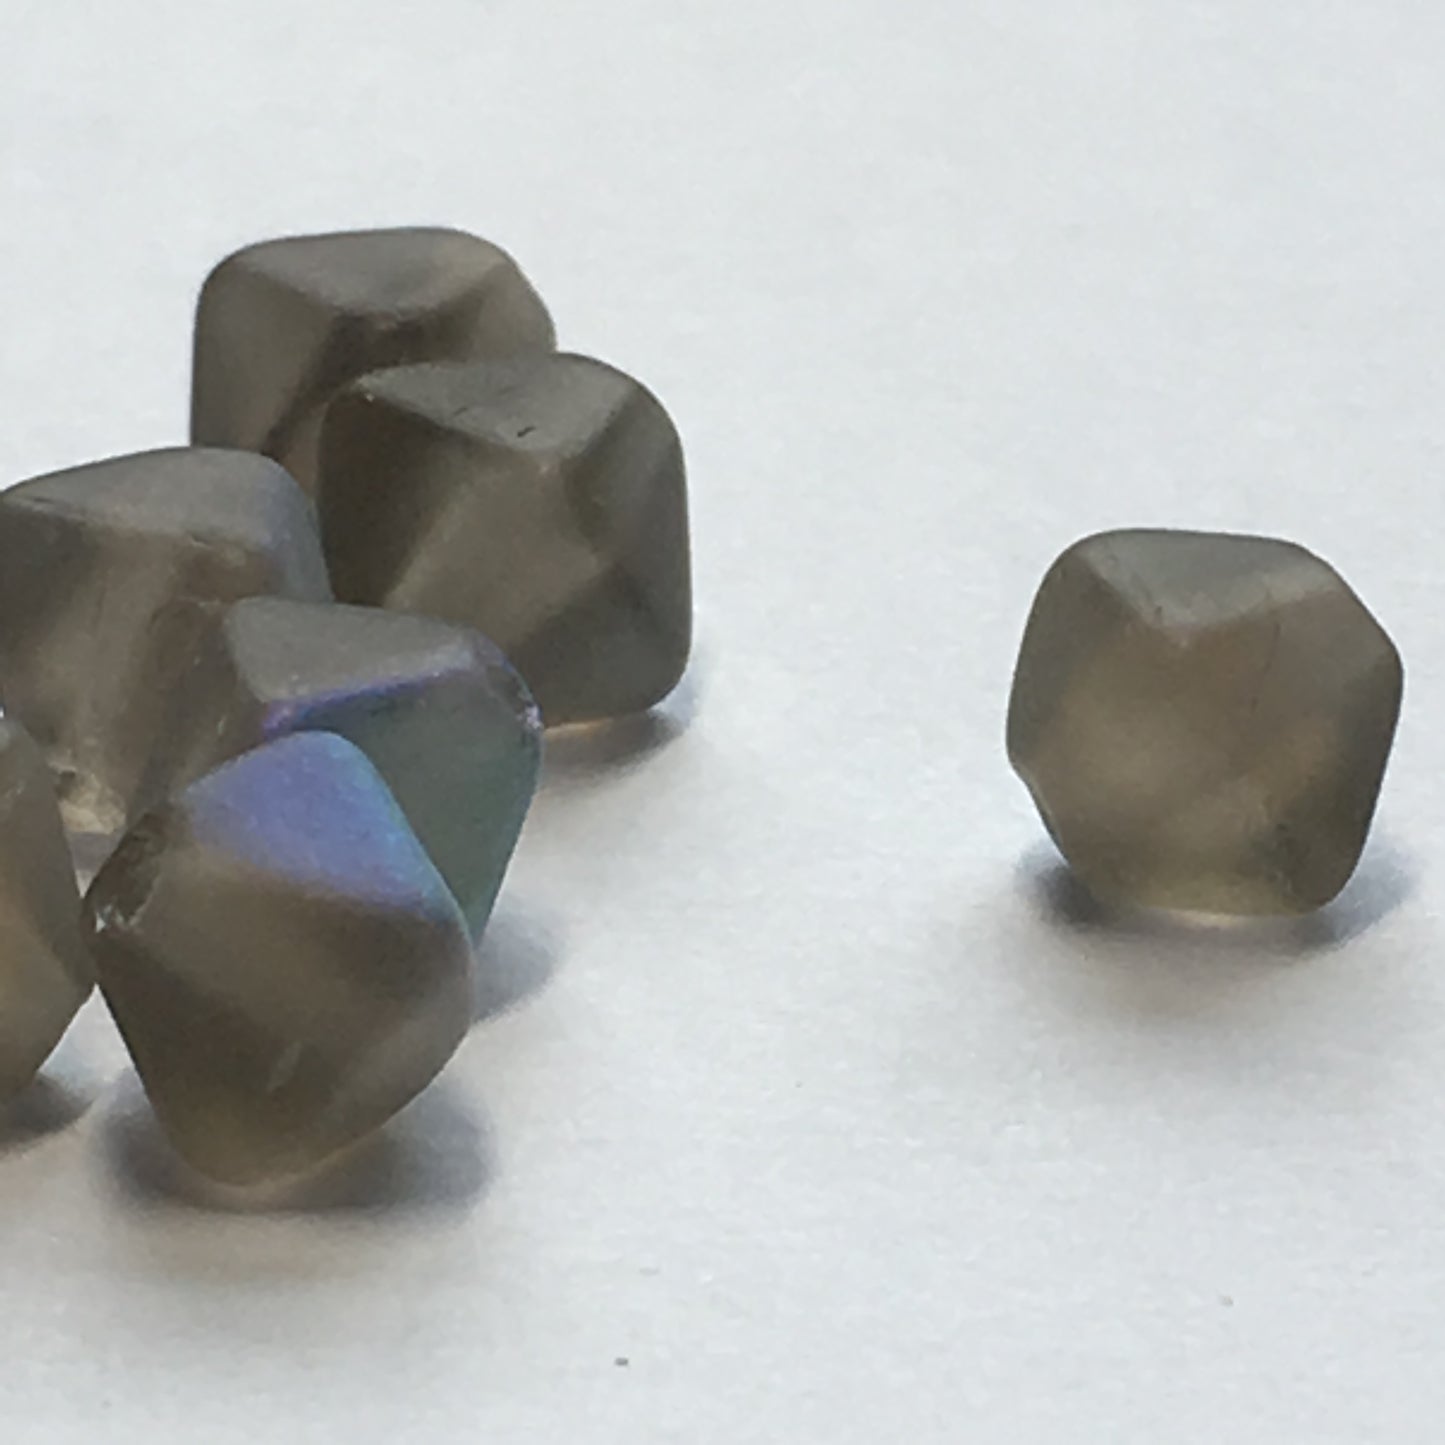 Gray Frosted AB Glass Bicone Beads, 6 mm, 8 Beads